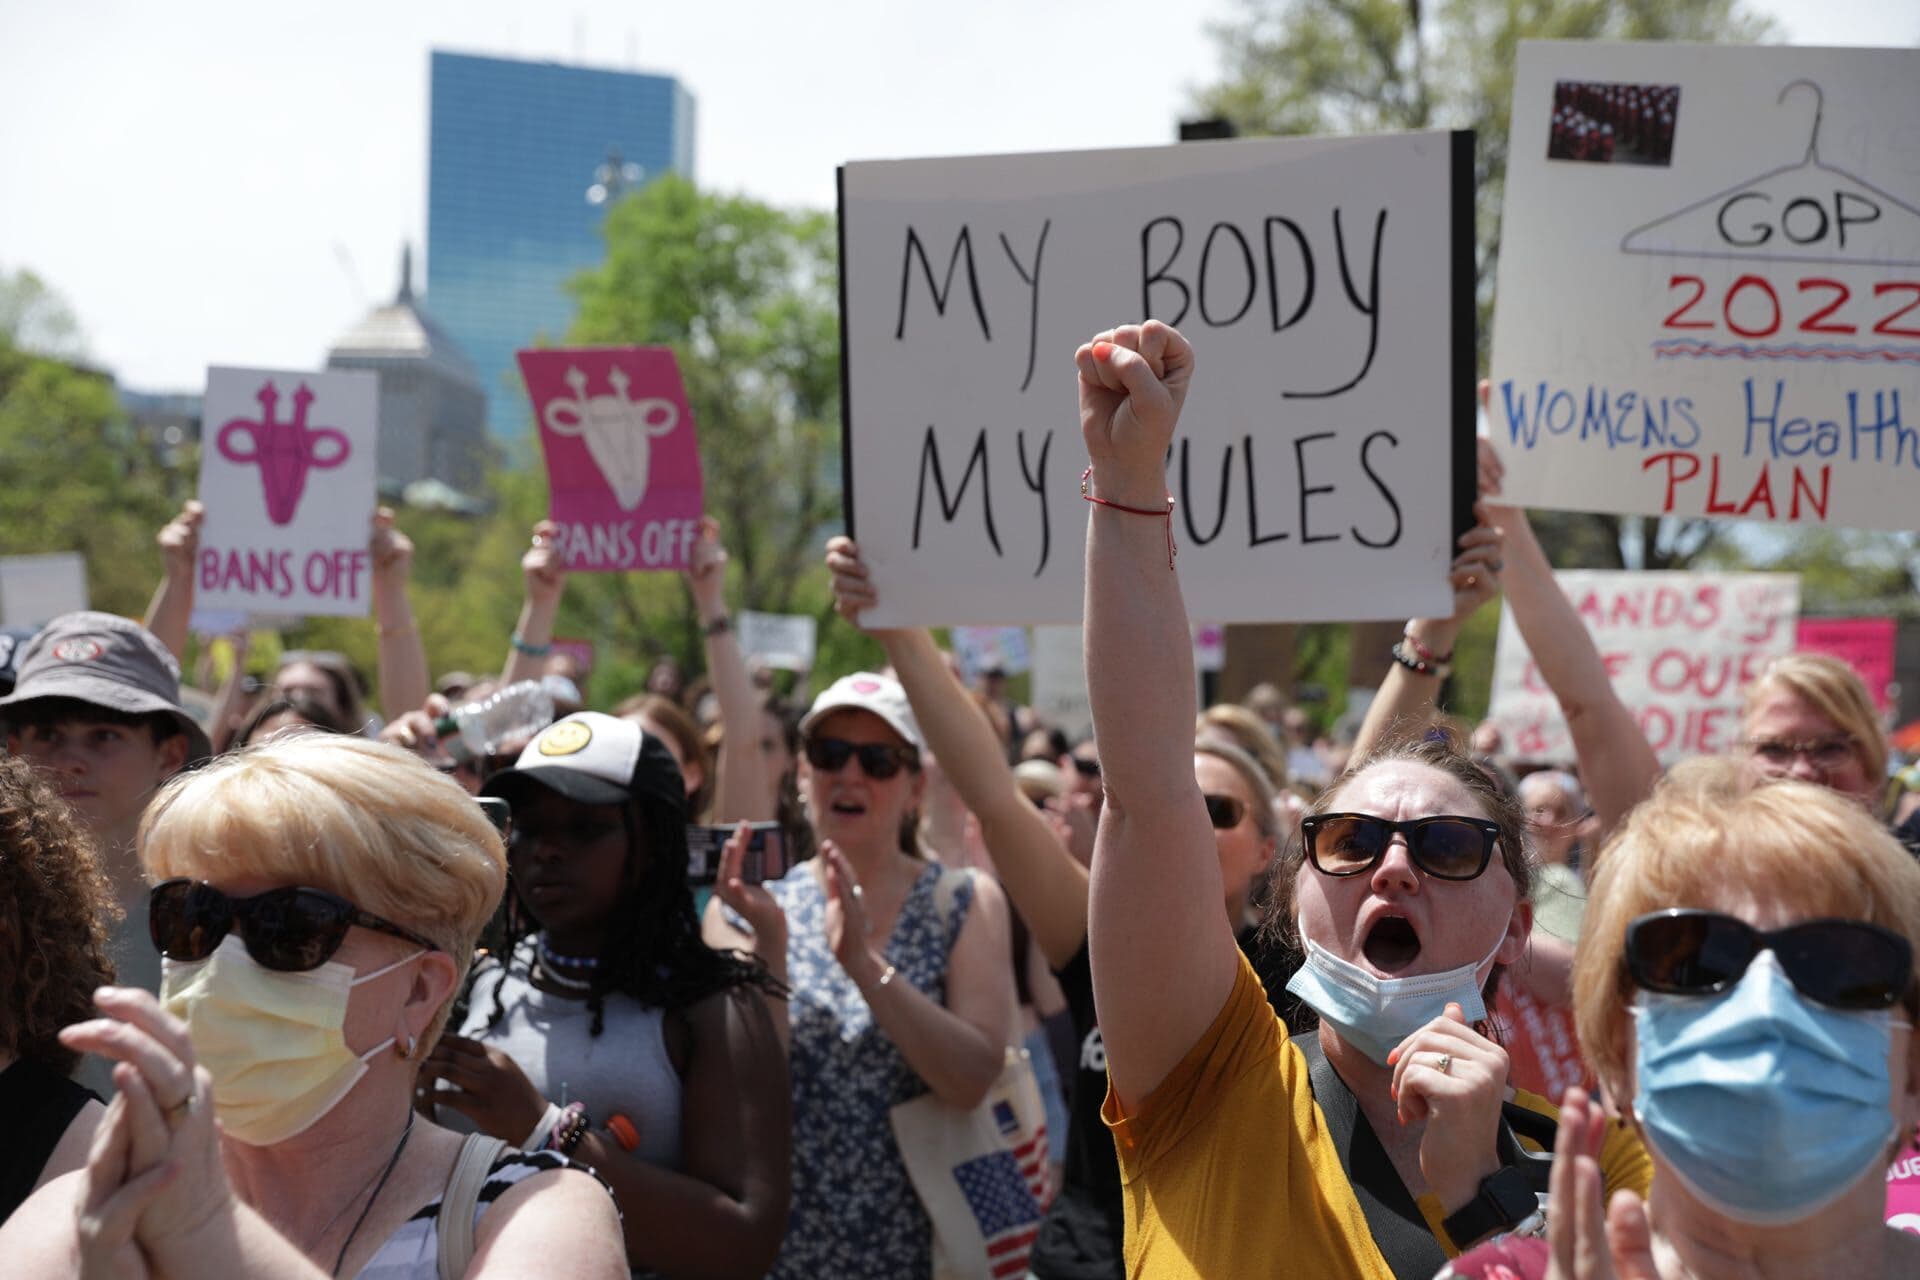 Protestors flocked to the Boston Common with signs in hand Saturday afternoon to support abortion rights and decry the recent draft opinion from the Supreme Court in favor of overturning Roe v. Wade. (Robin Lubbock/WBUR)